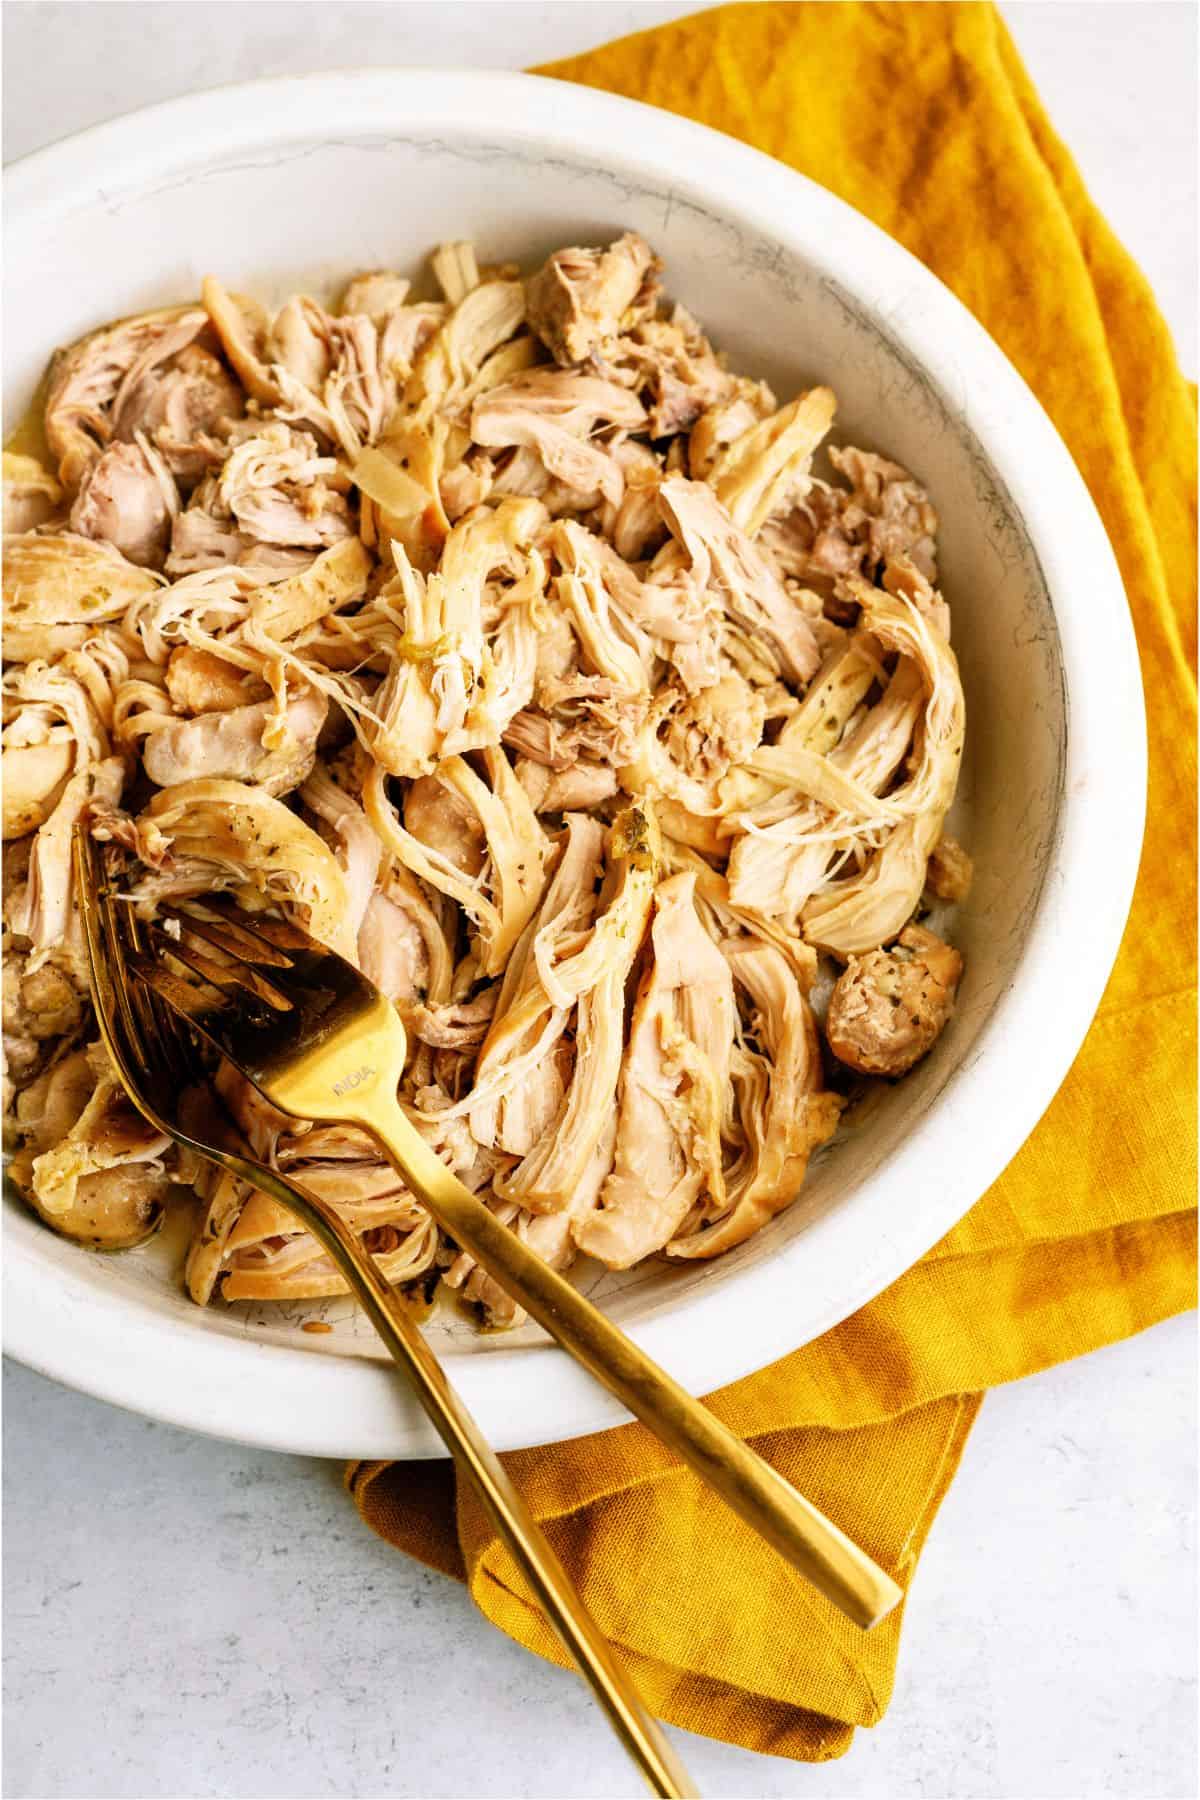 Shredded chicken in a bowl with 2 forks